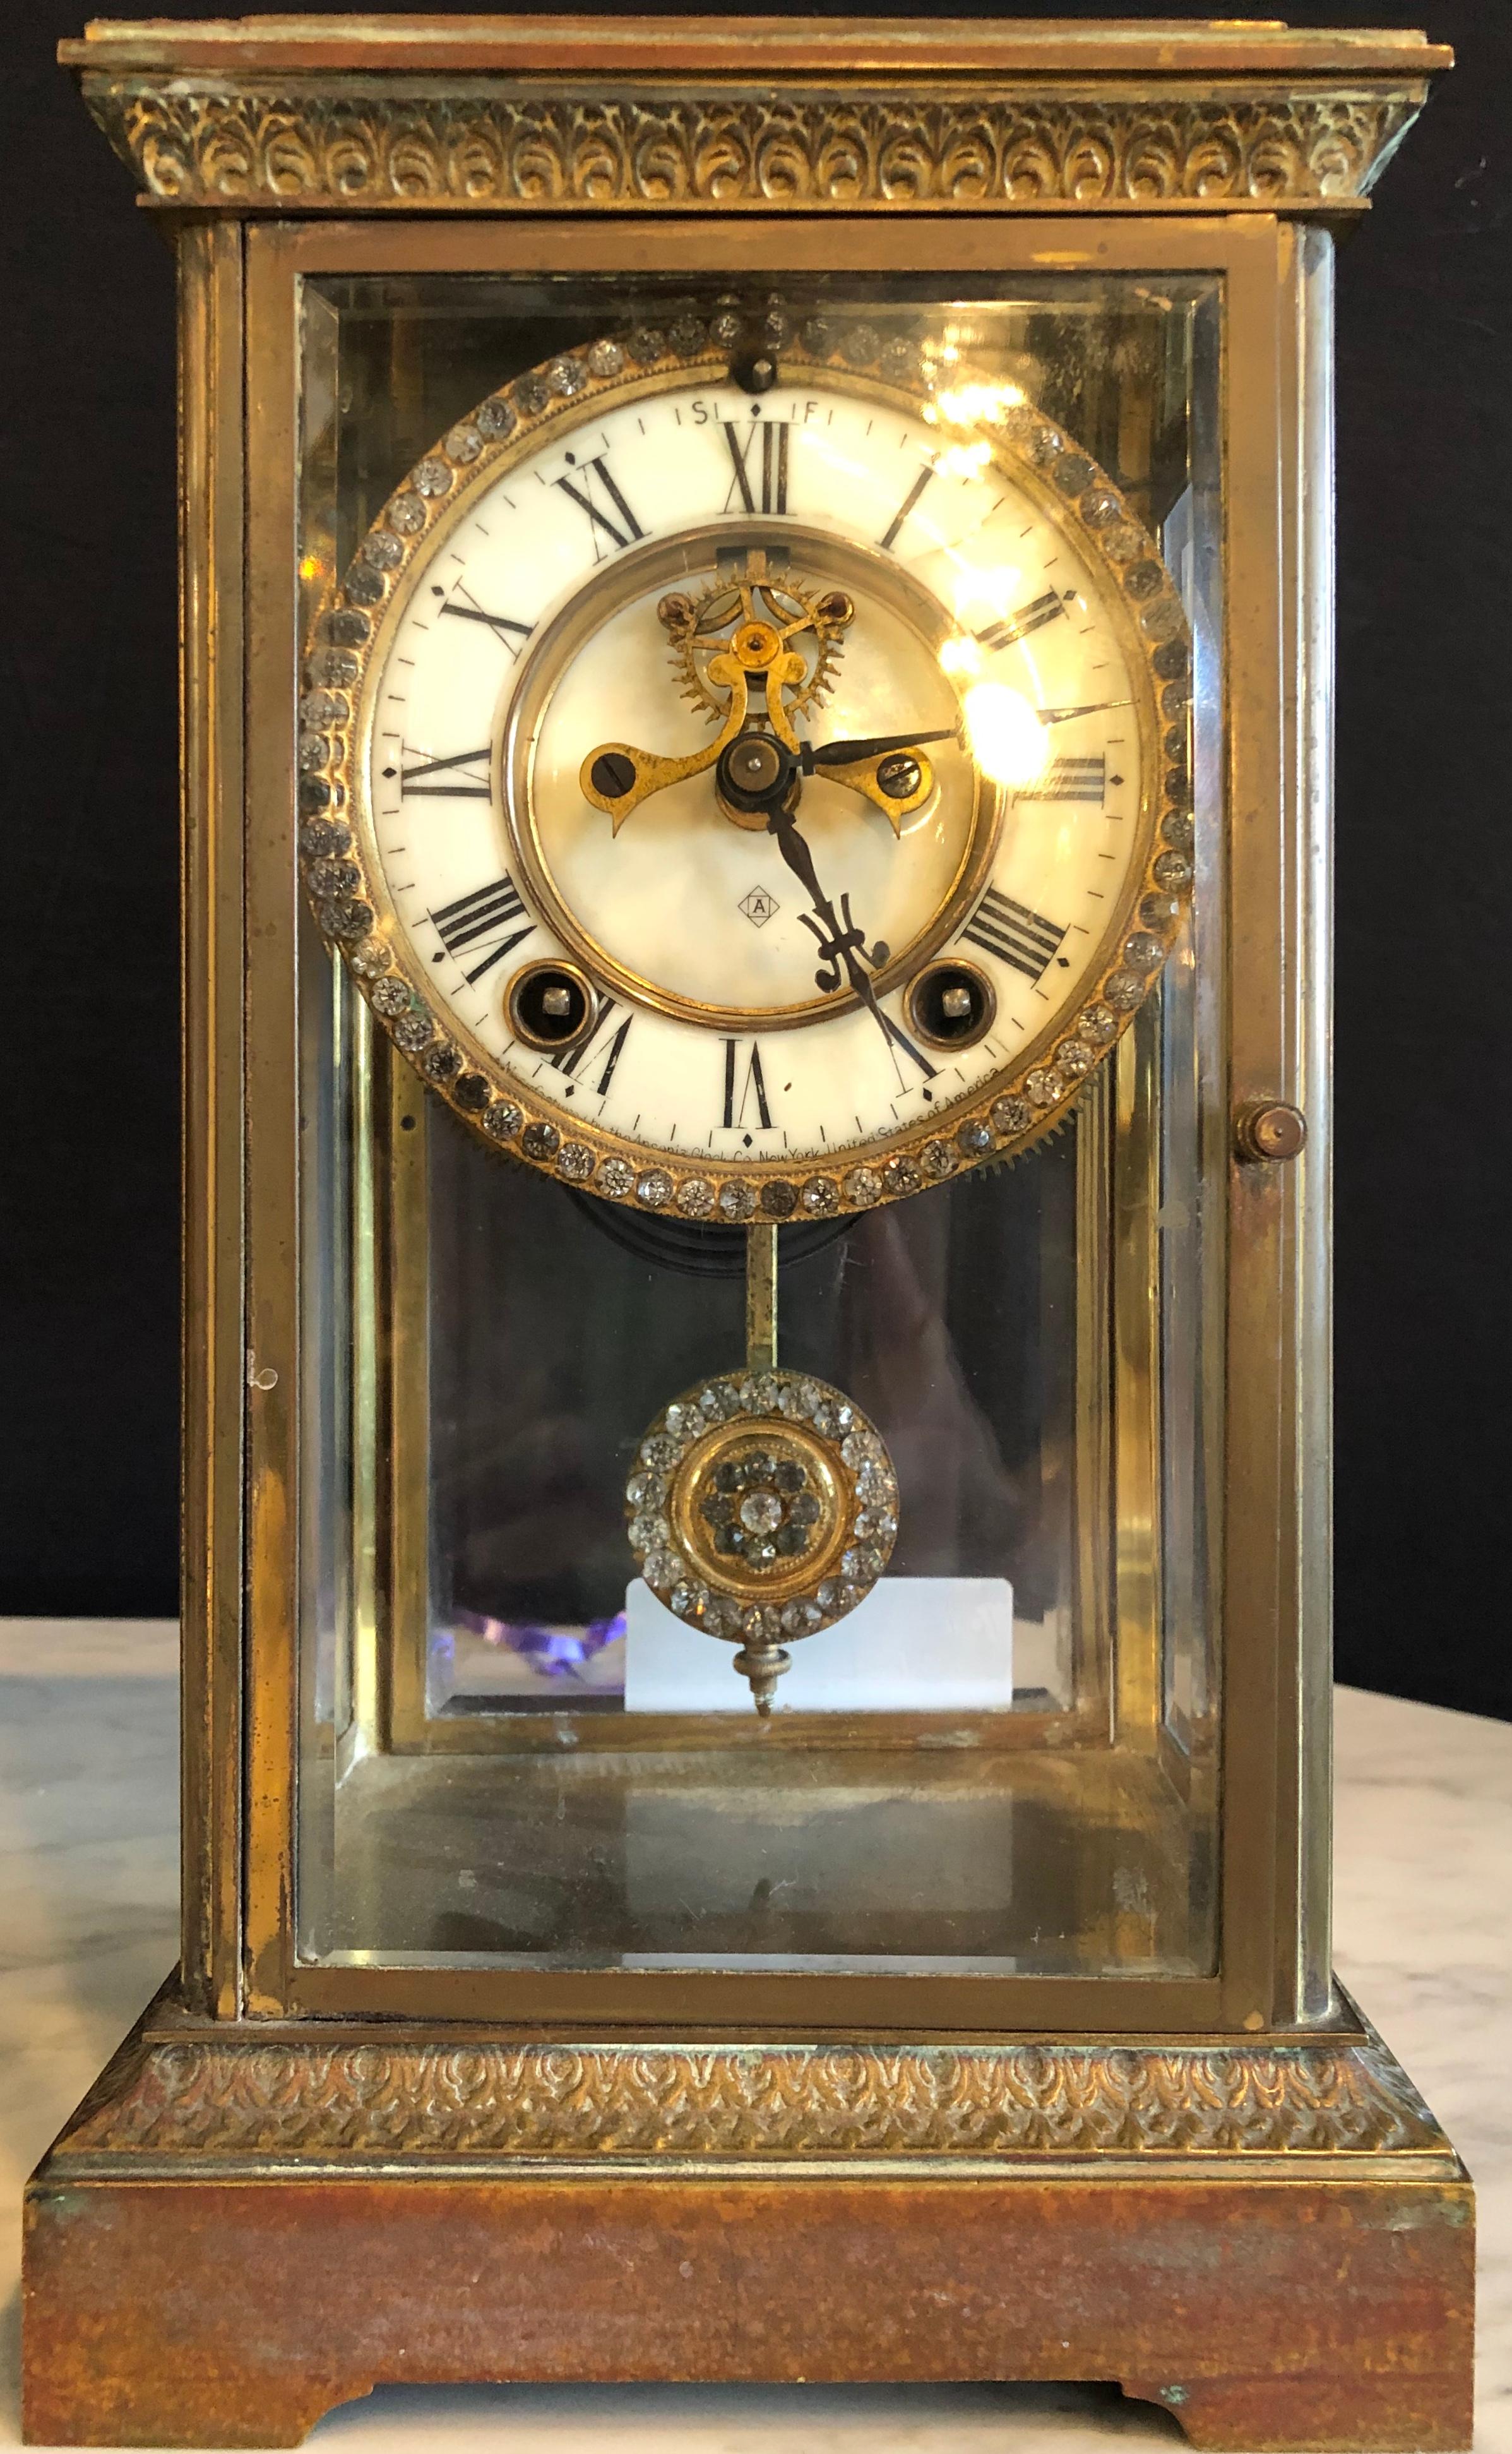 Crystal face and pendulum clock made by Ansonia Clock of New York. Bronze case in all beveled glass surround.